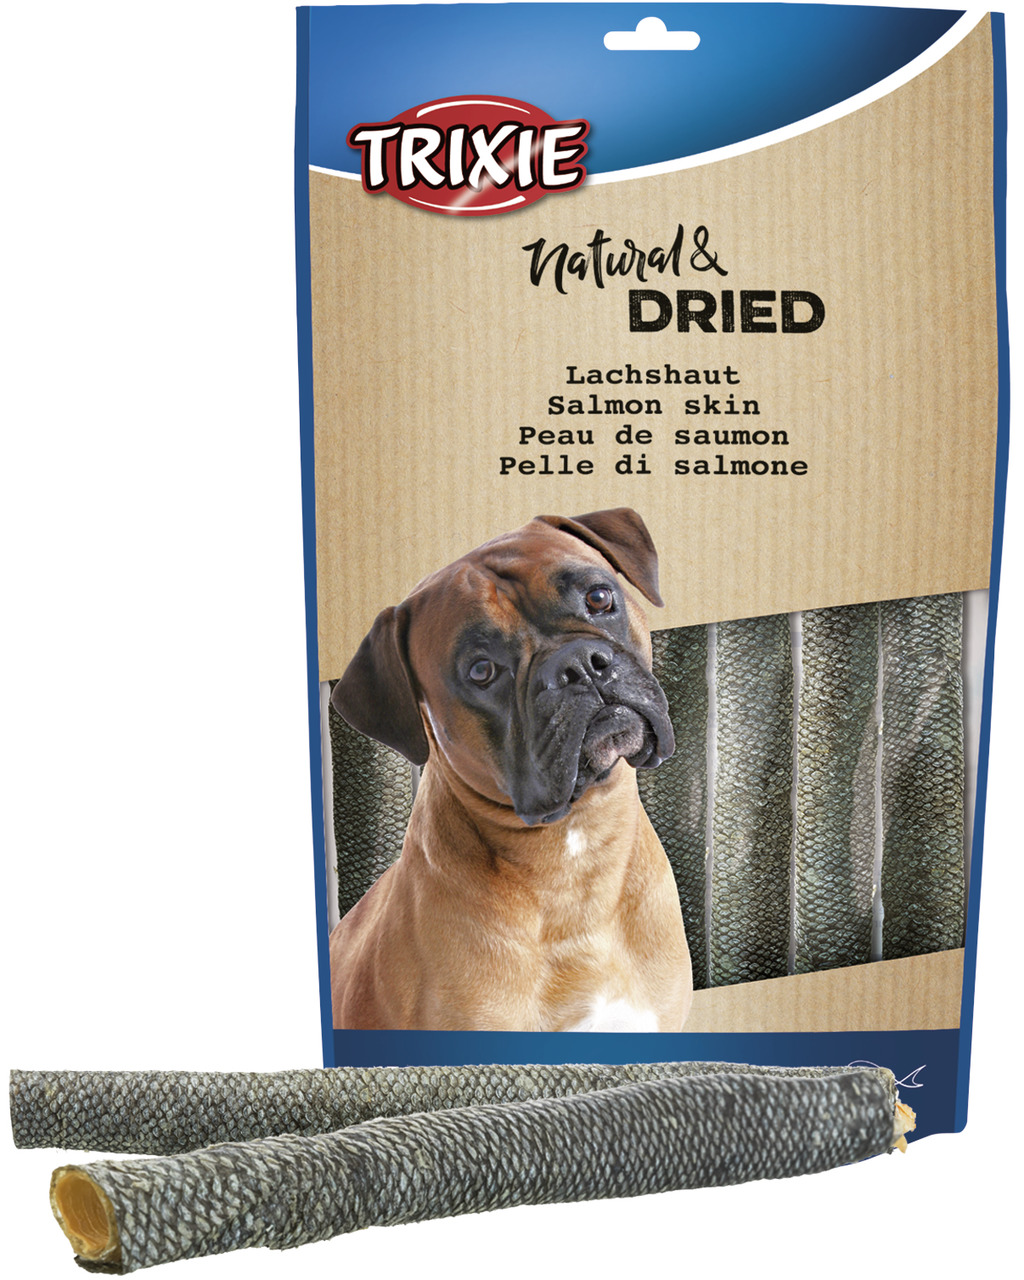 Trixie Natural & Dried Lachshaut Hunde Snack 150 g